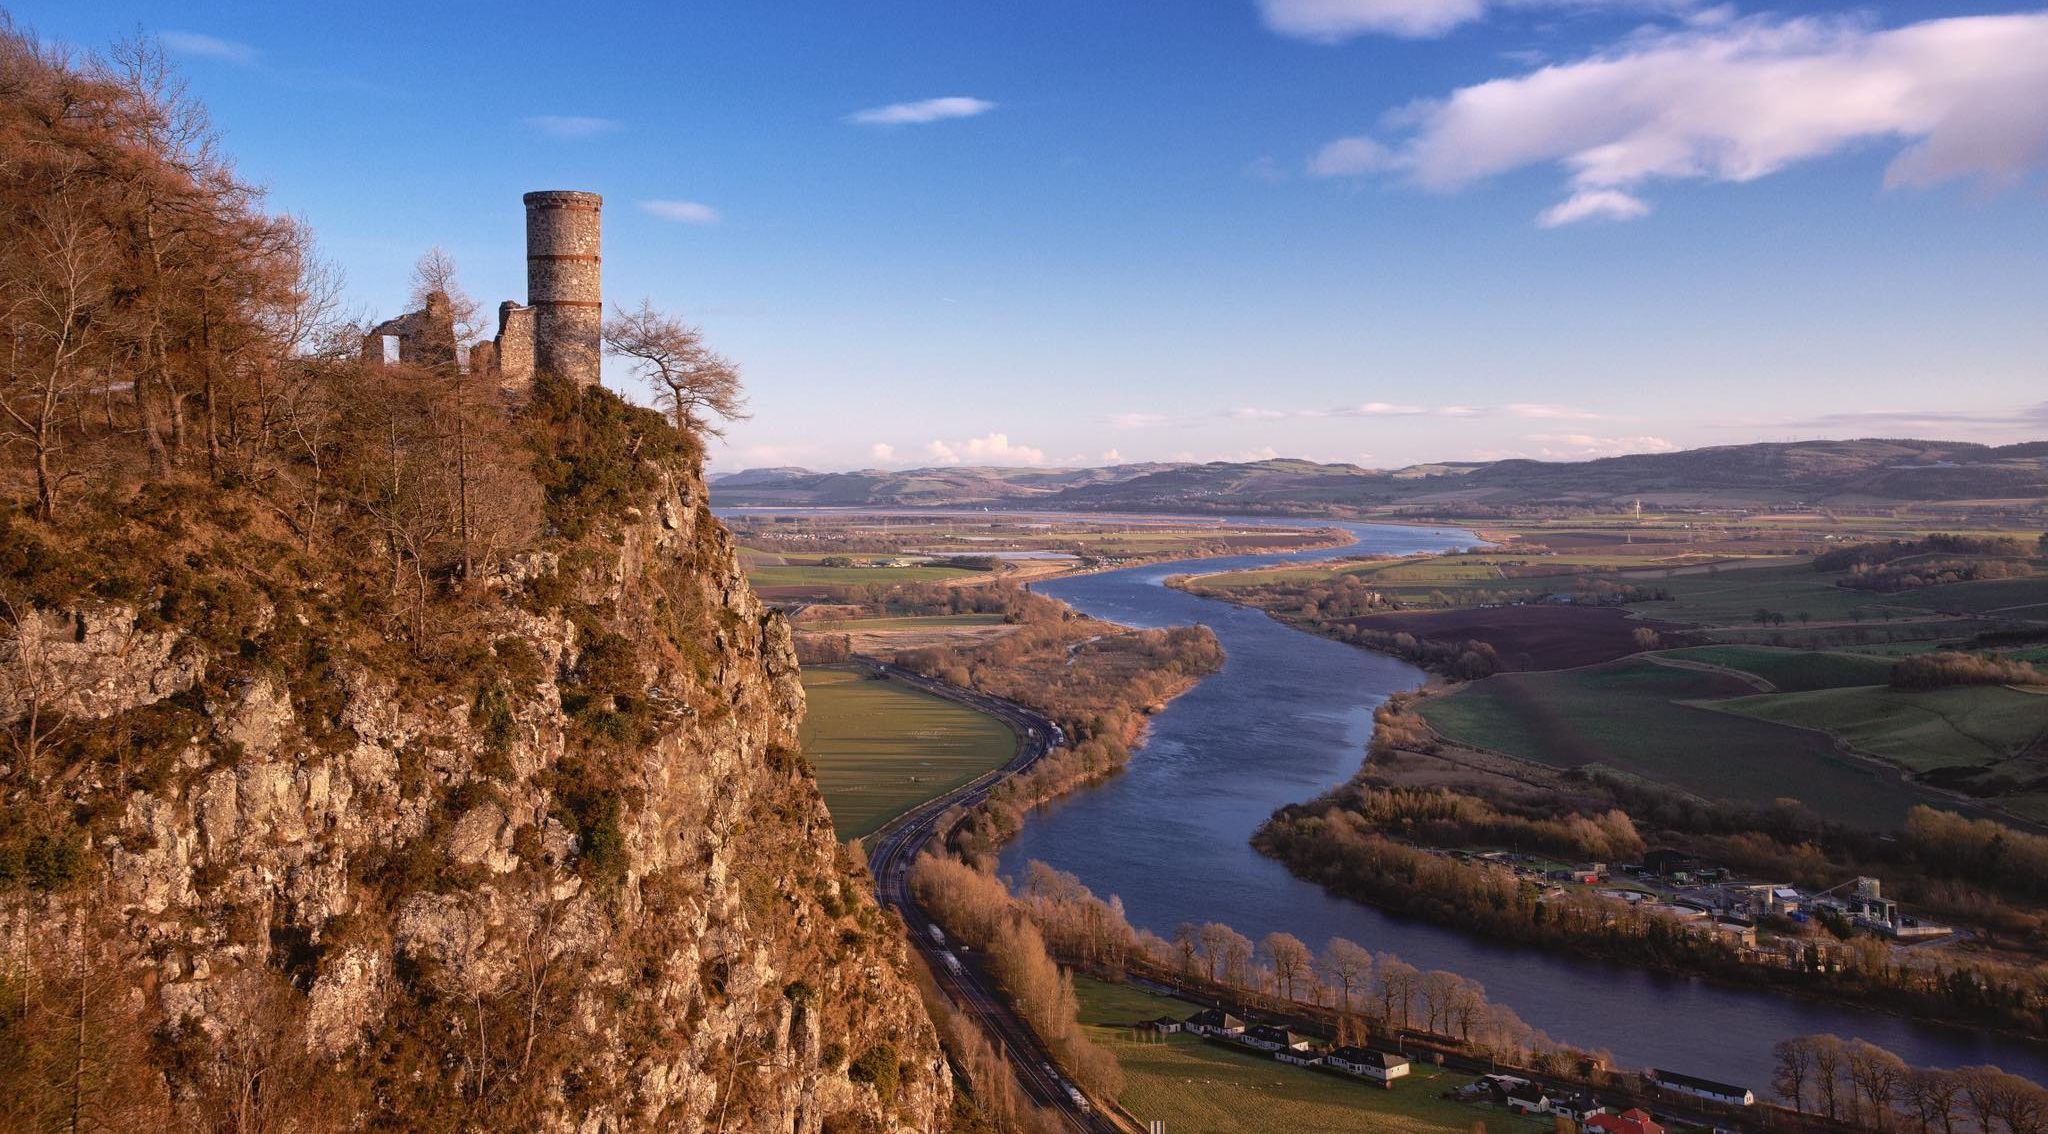 The Tower on Kinnoull Hill above the River Tay